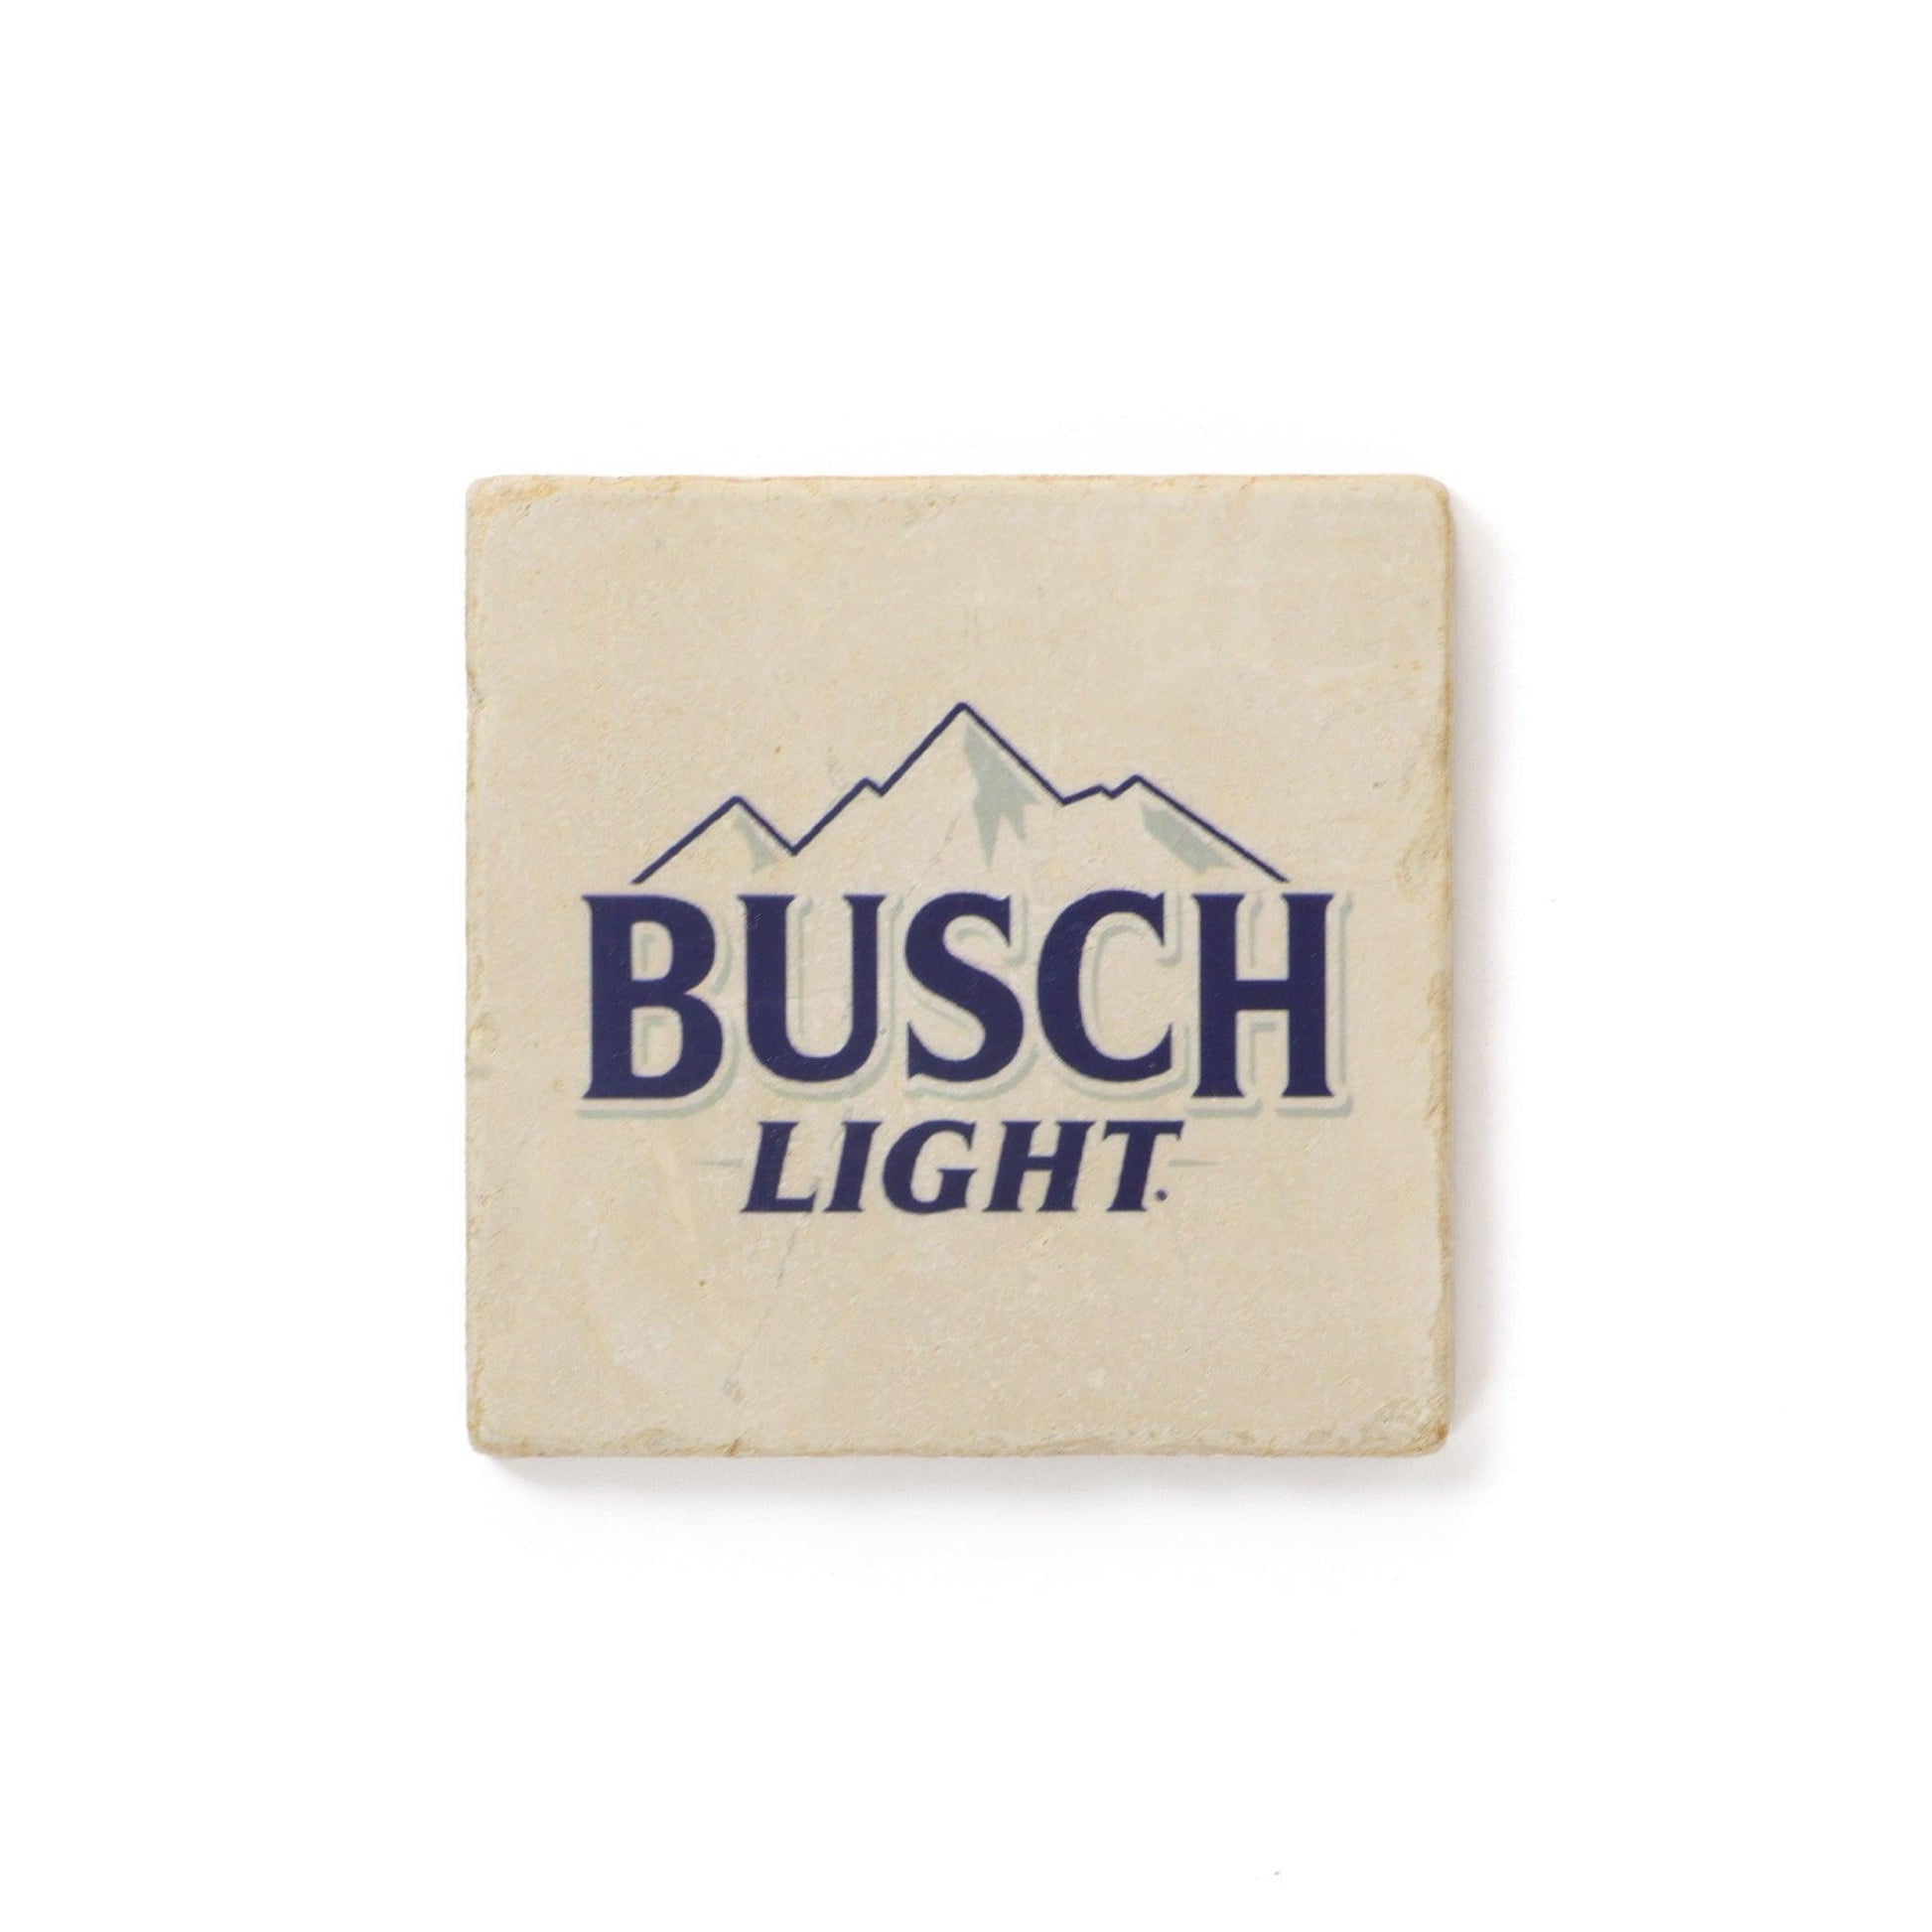 cream colored square stone coaster with Busch Light logo with mountains